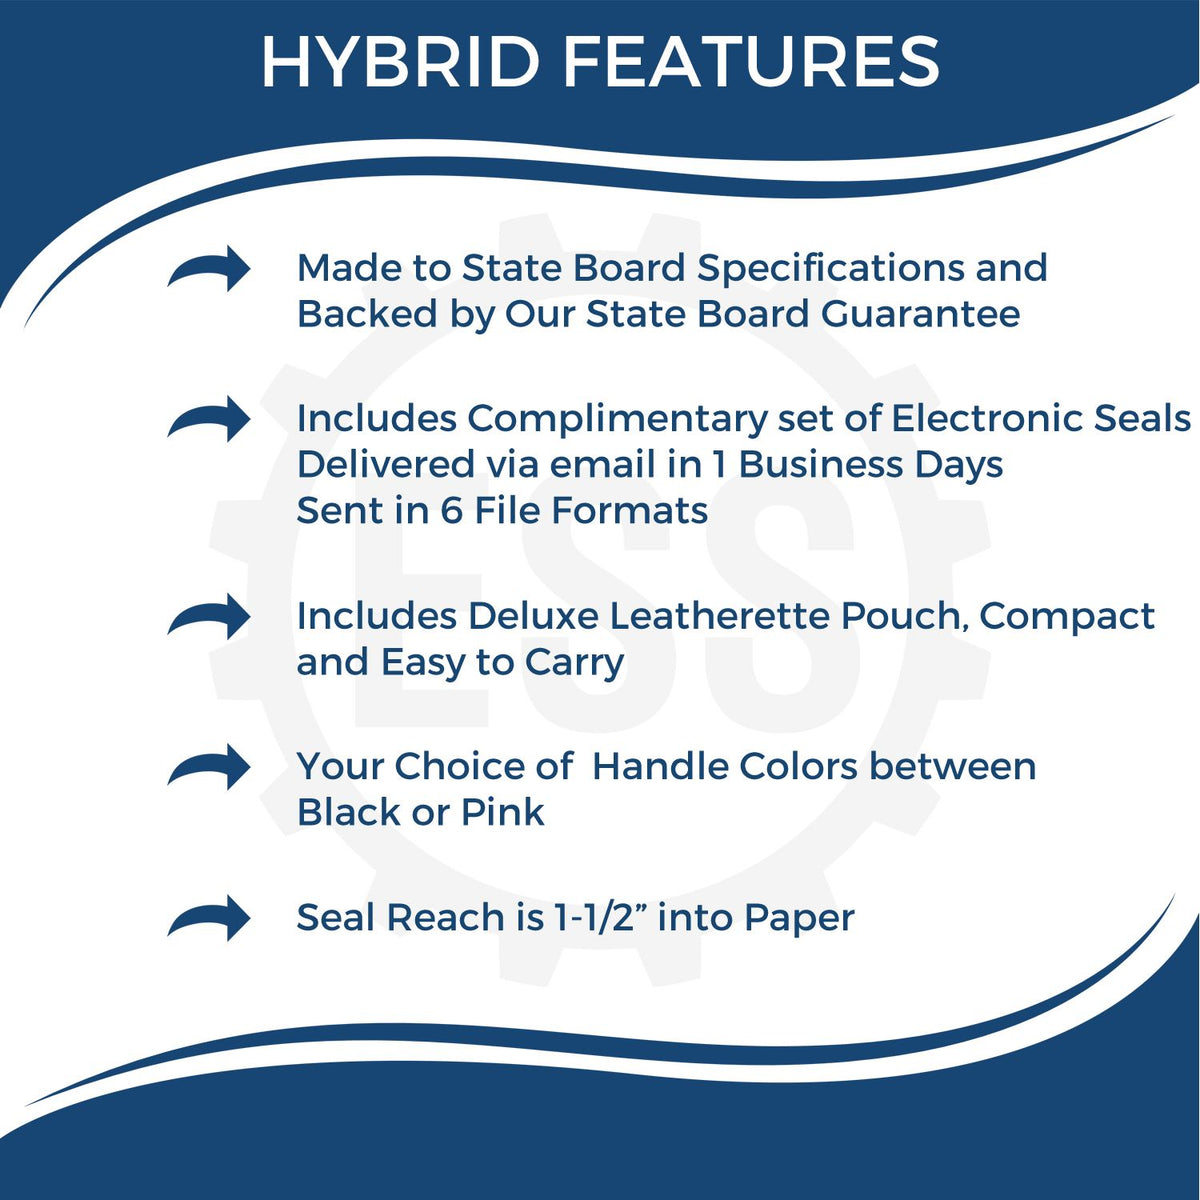 A picture of an infographic highlighting the selling points for the Hybrid Nevada Engineer Seal